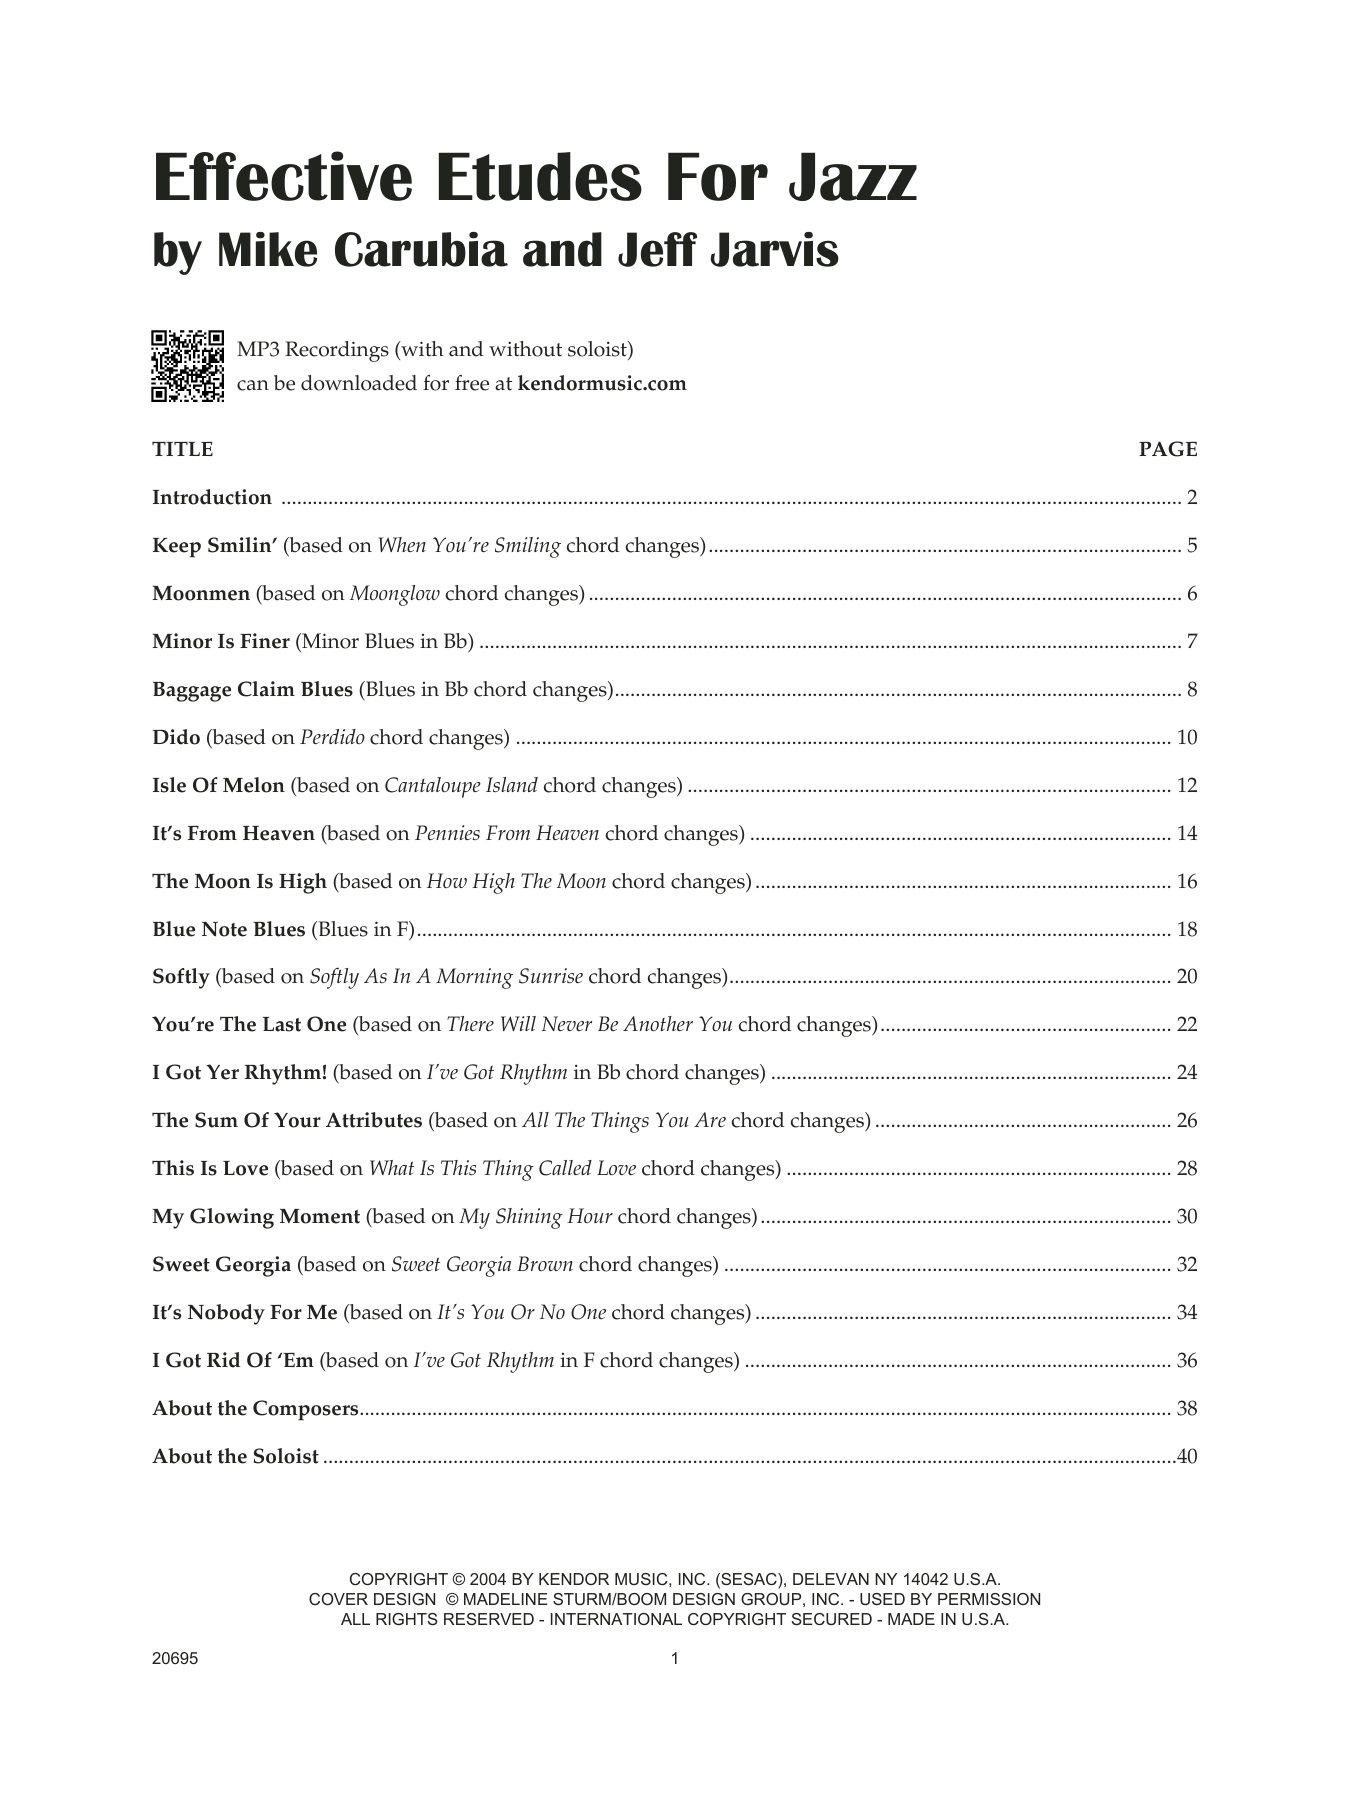 Download Mike Carubia & Jeff Jarvis Effective Etudes For Jazz - Bb Trumpet Sheet Music